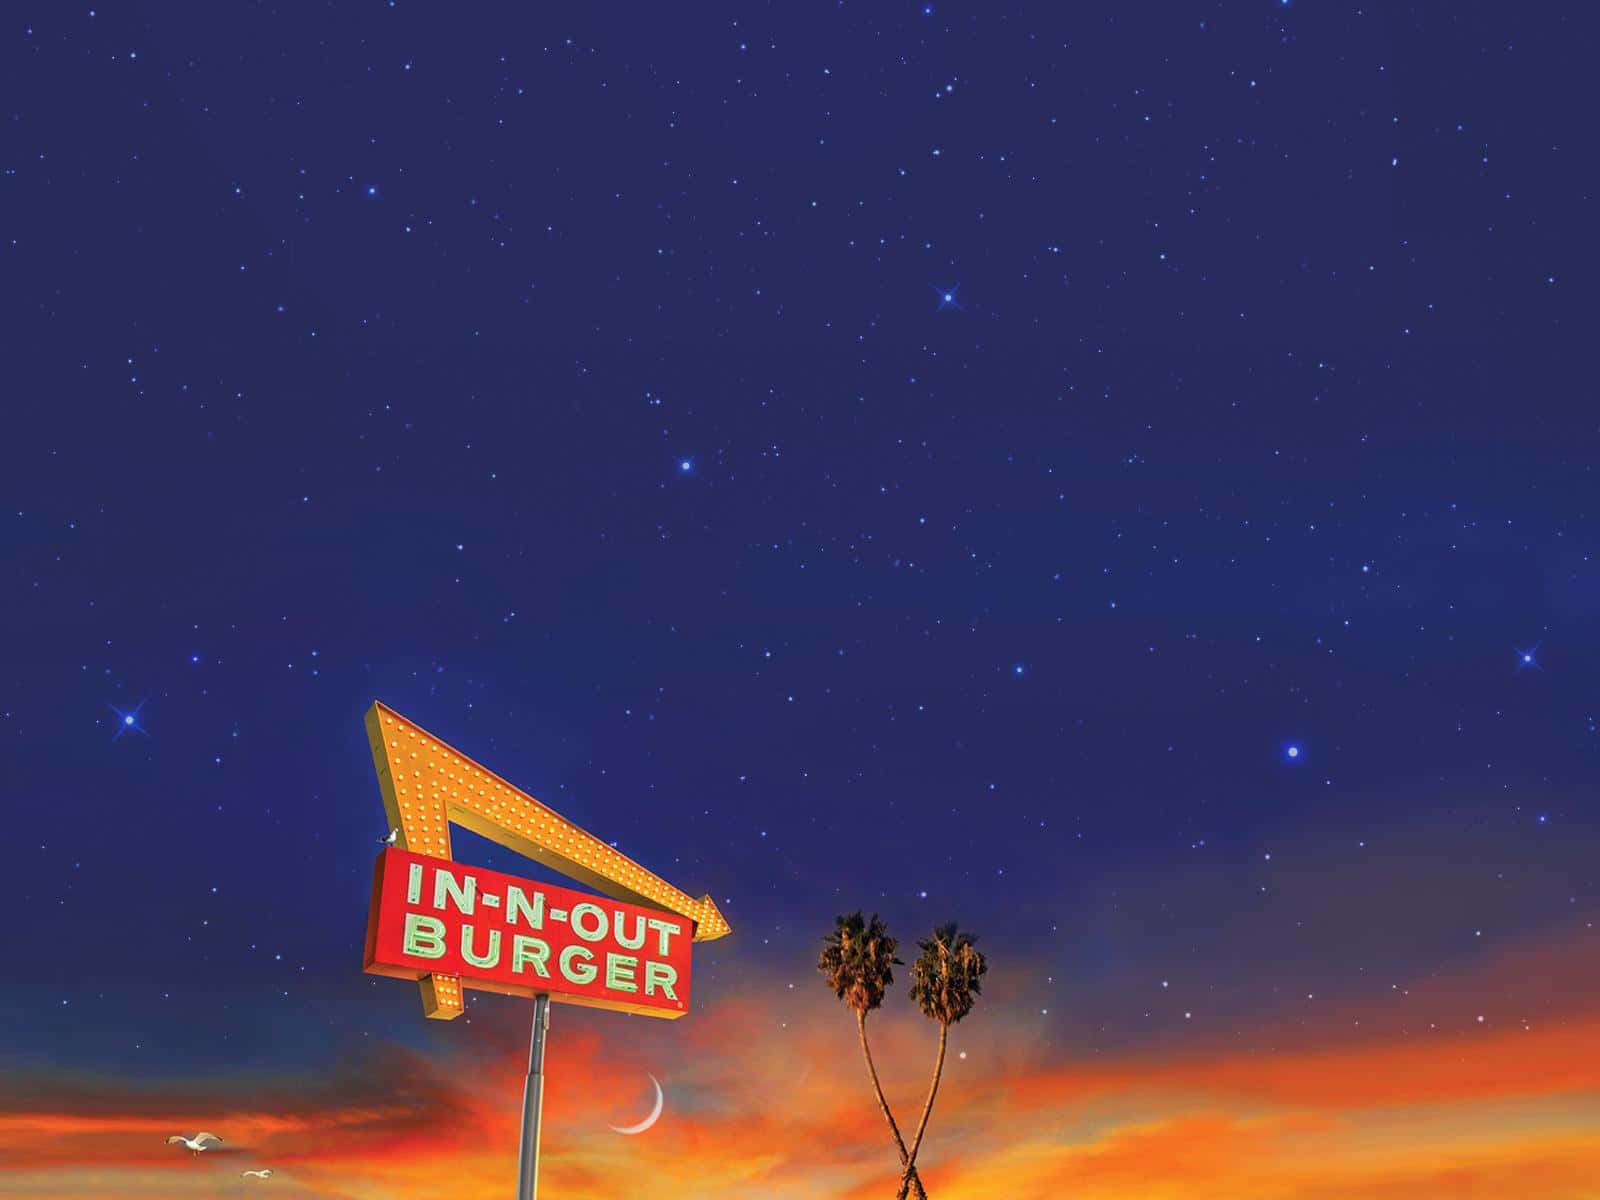 Enjoying the classic In N Out burger Wallpaper